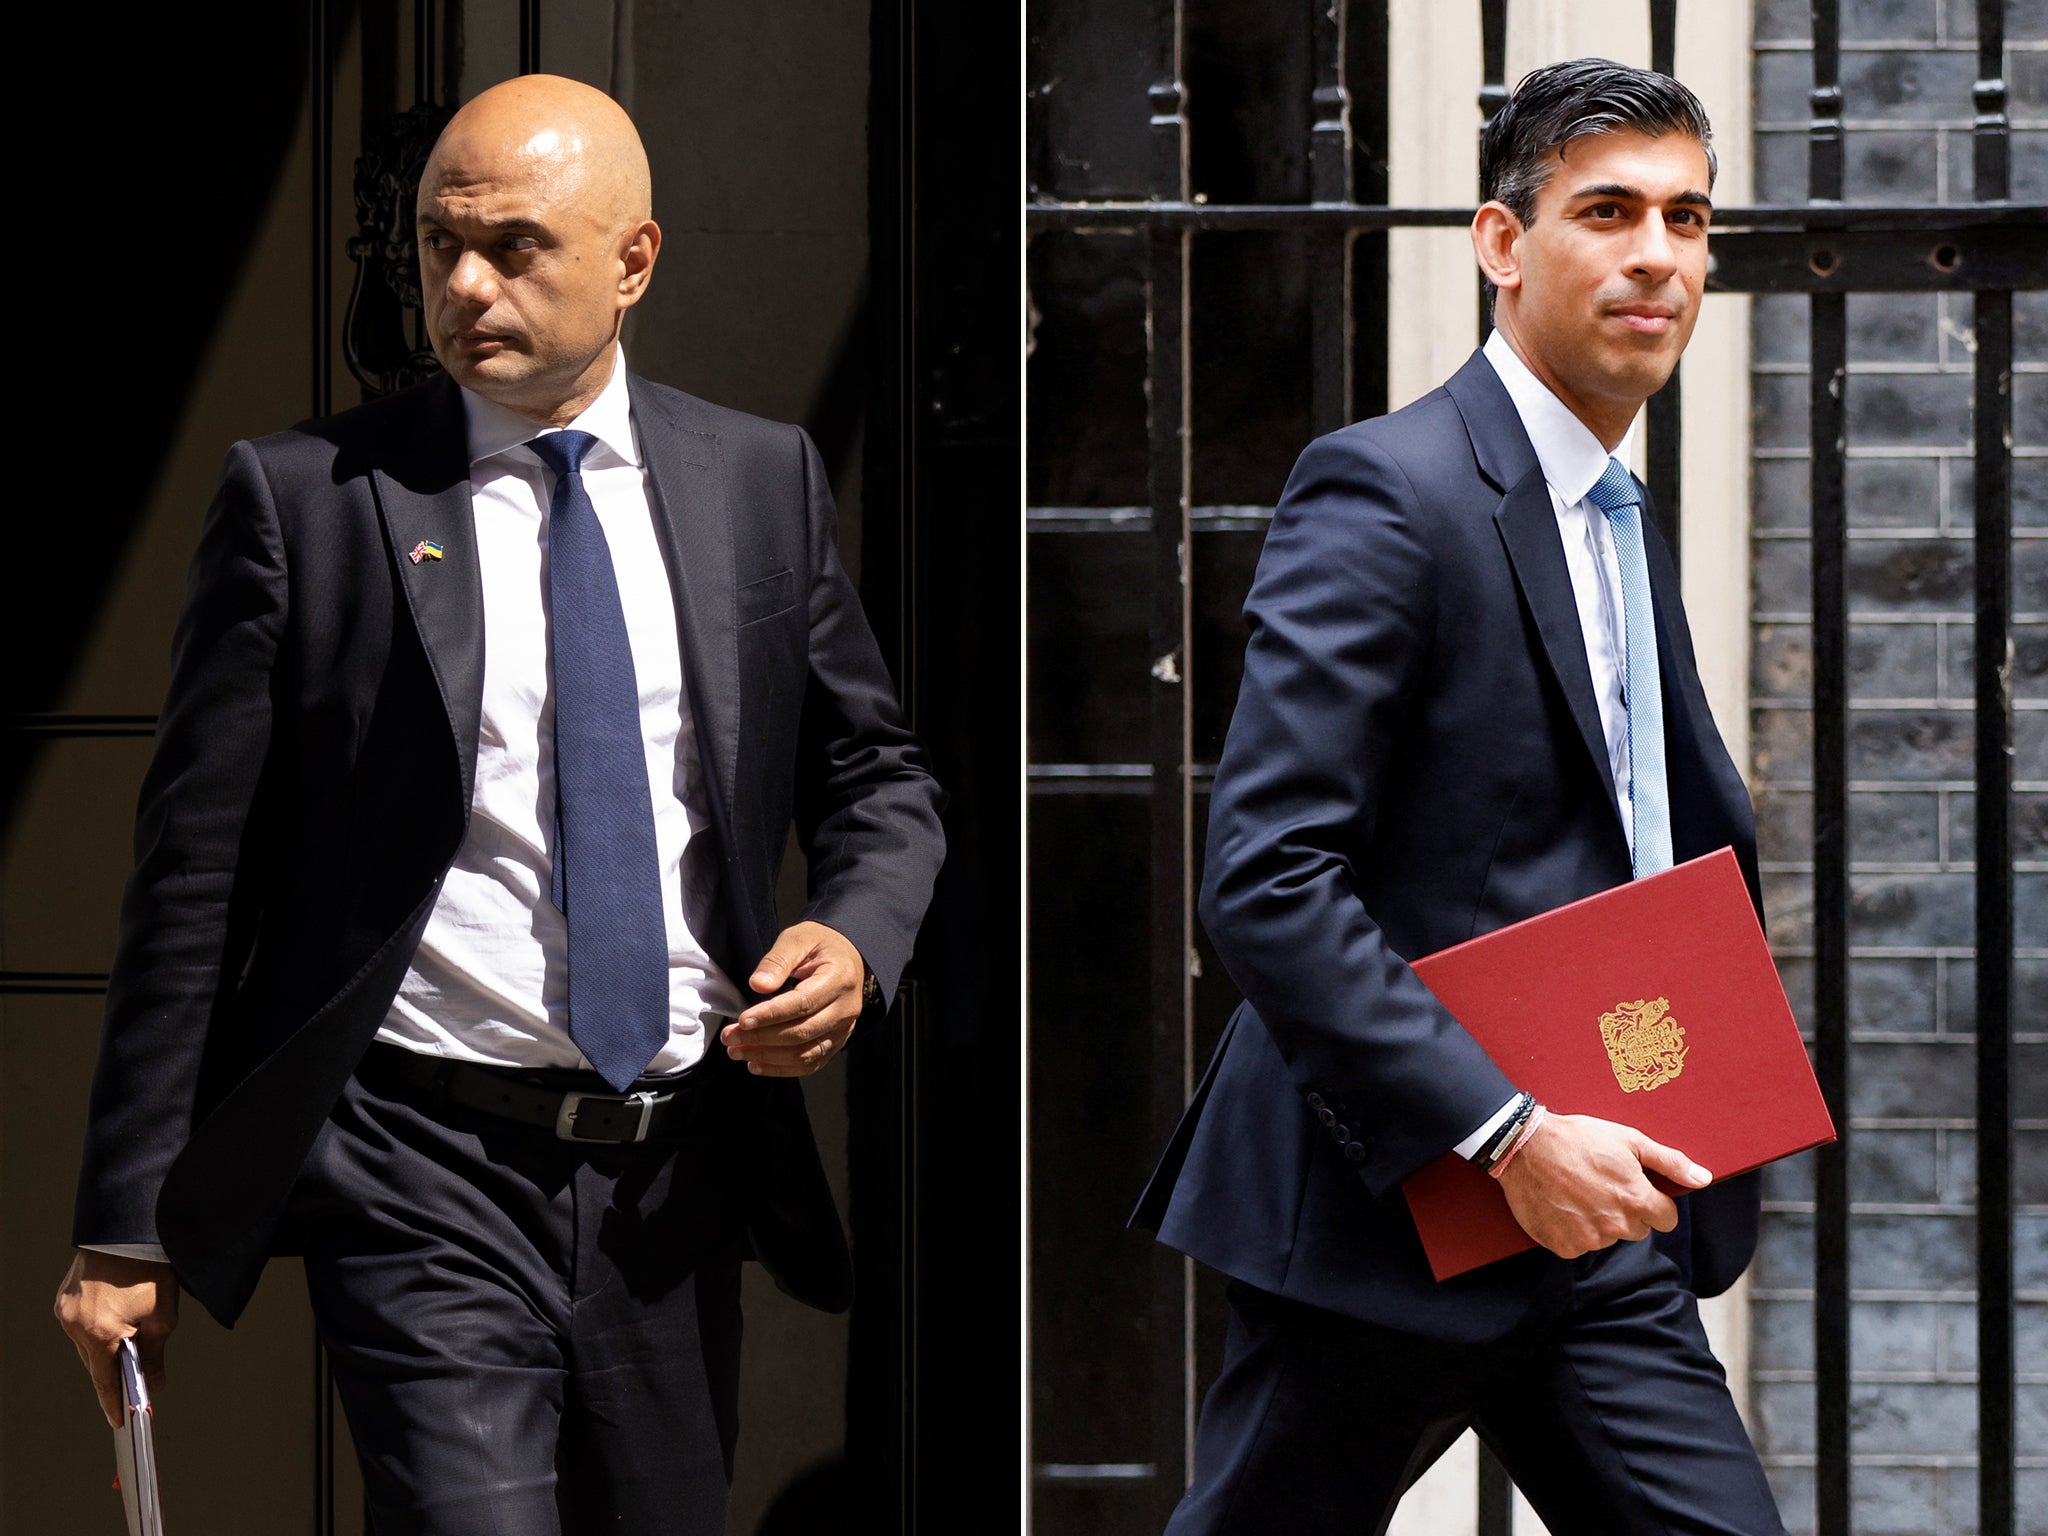 Rishi Sunak and Sajid Javid resigned within minutes of each other